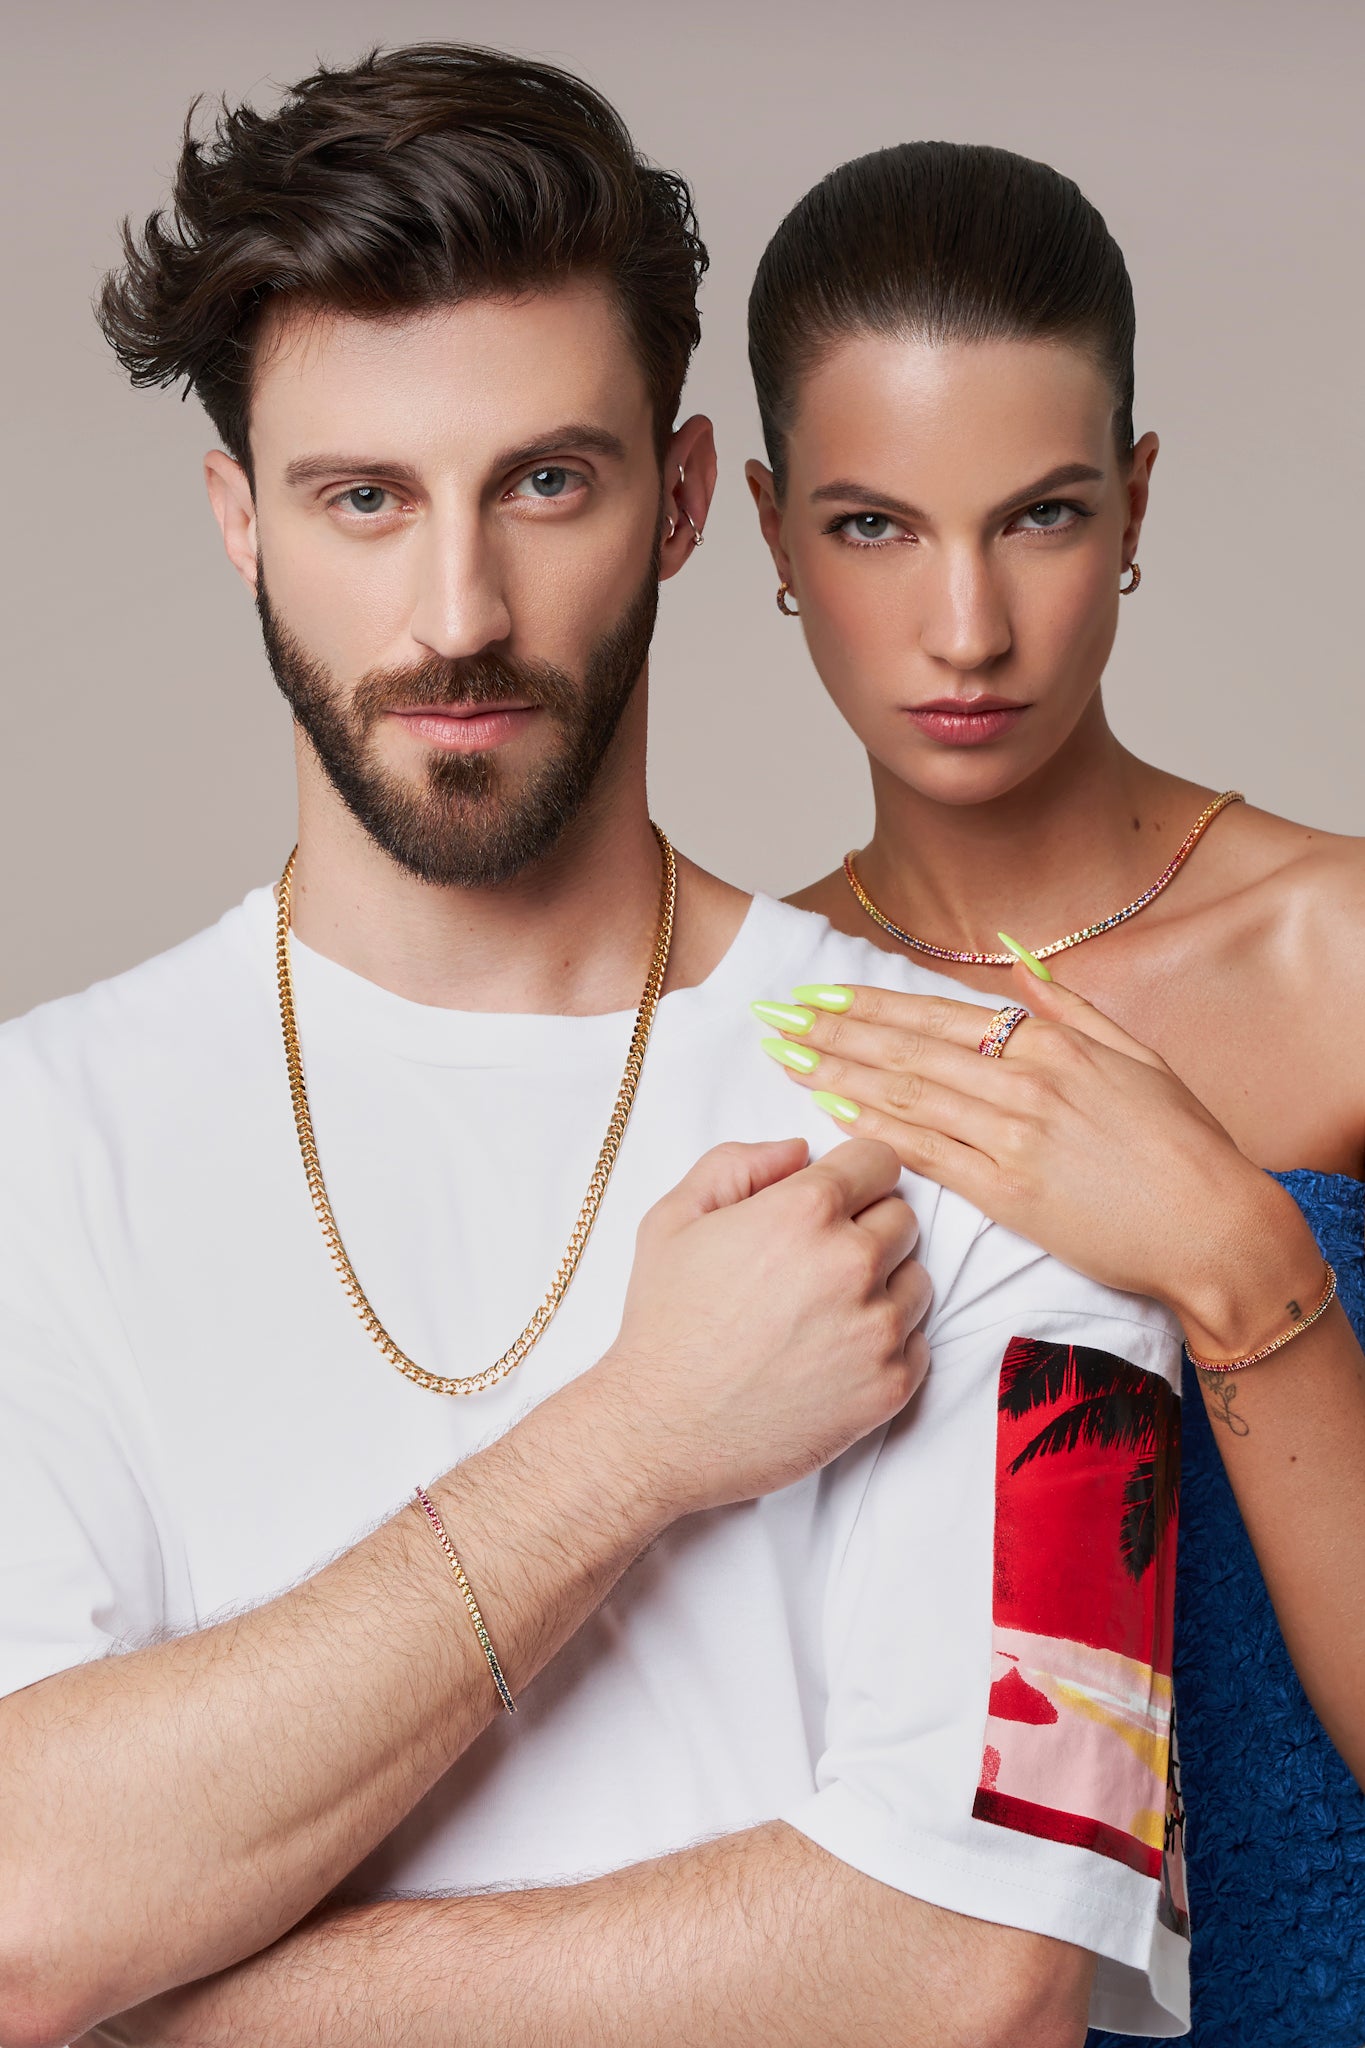 Man and woman with jewellery